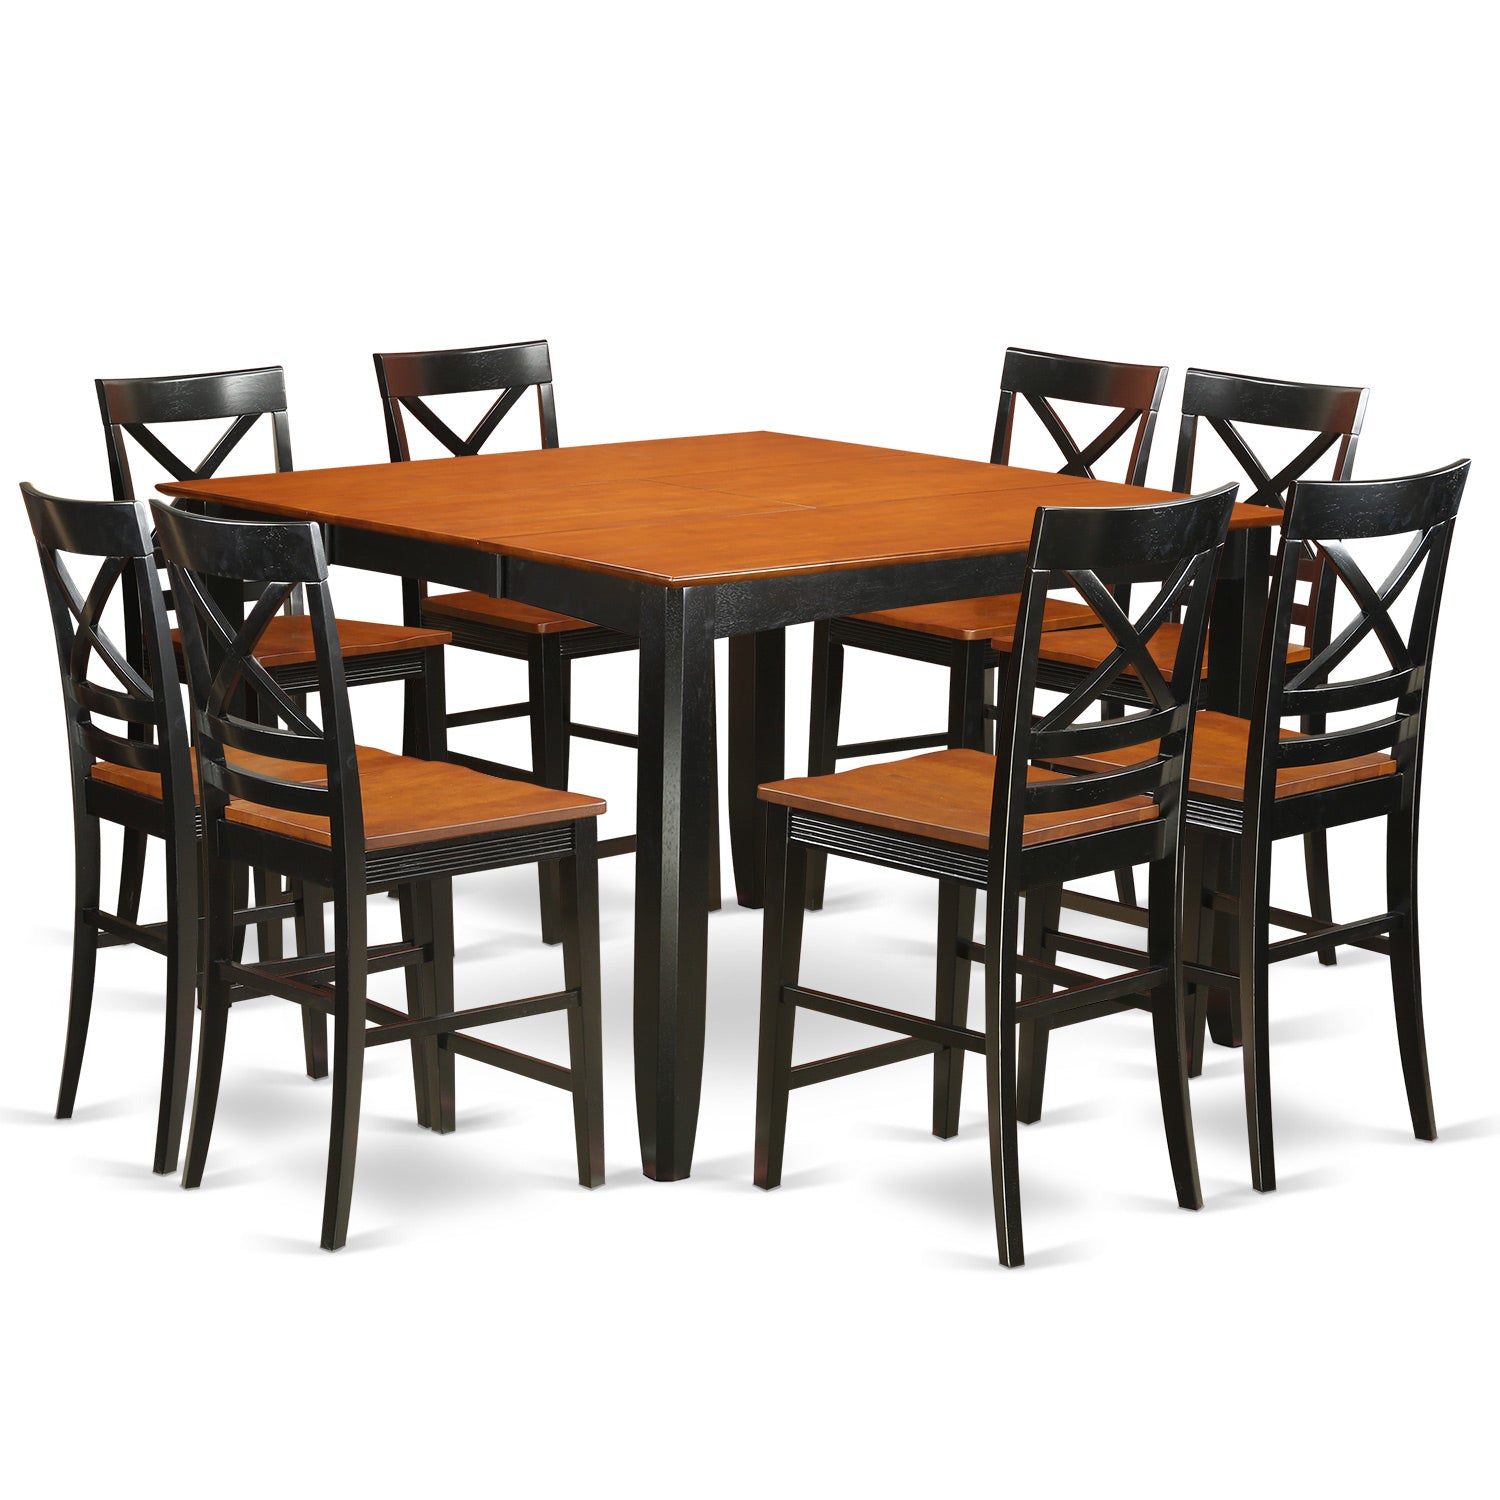 FAQU9H-BLK-W 9 Pc counter height Dining set - Kitchen Table and 8 bar stools.